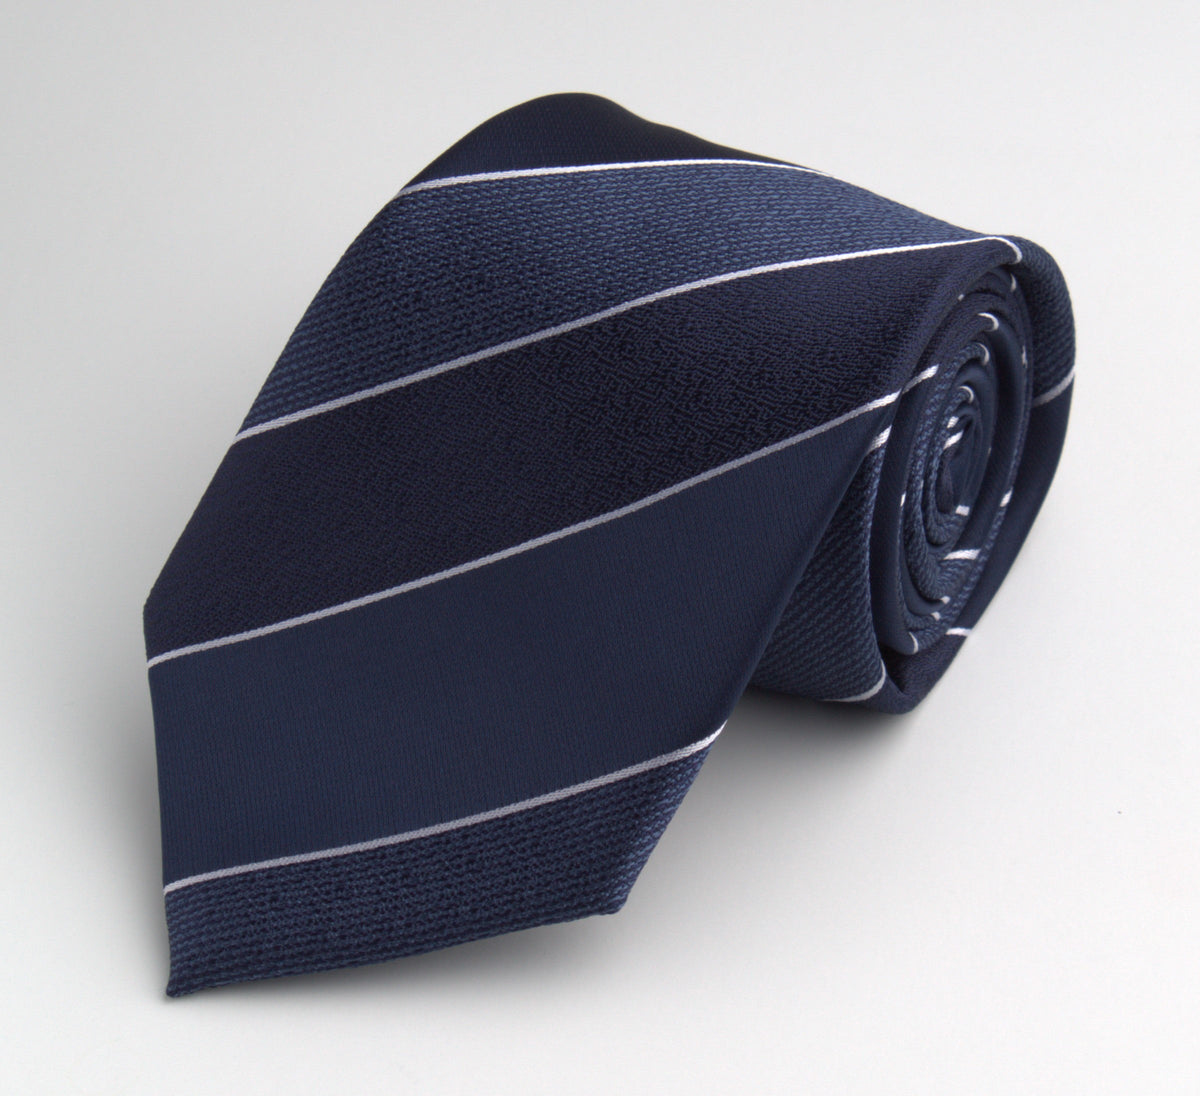 The Intrepid Traditional Tie